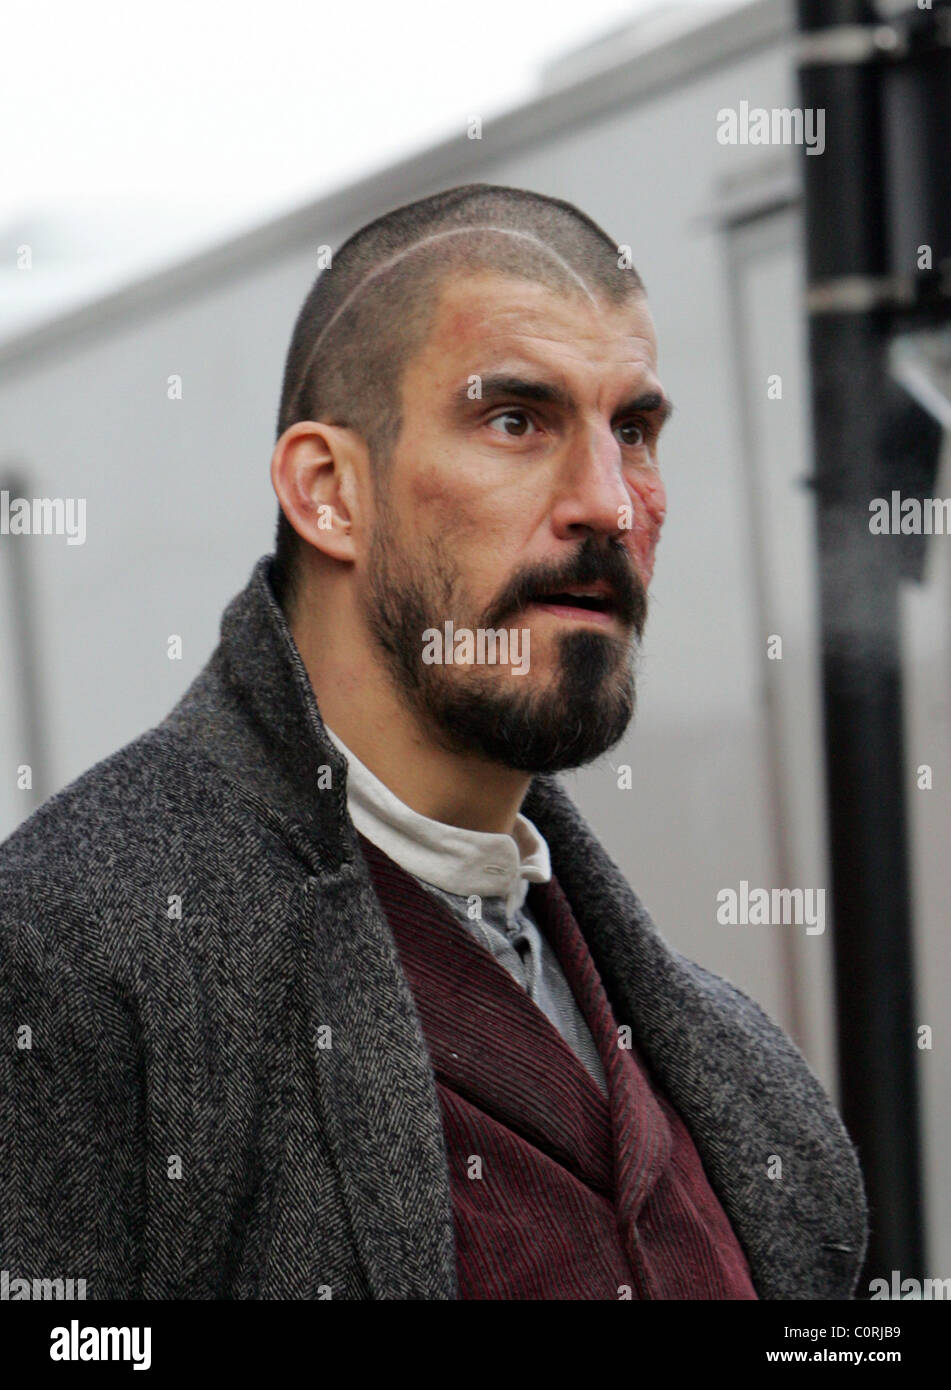 robert-maillet-on-set-of-his-new-movie-sherlock-holmes-due-for-release-C0RJB9.jpg